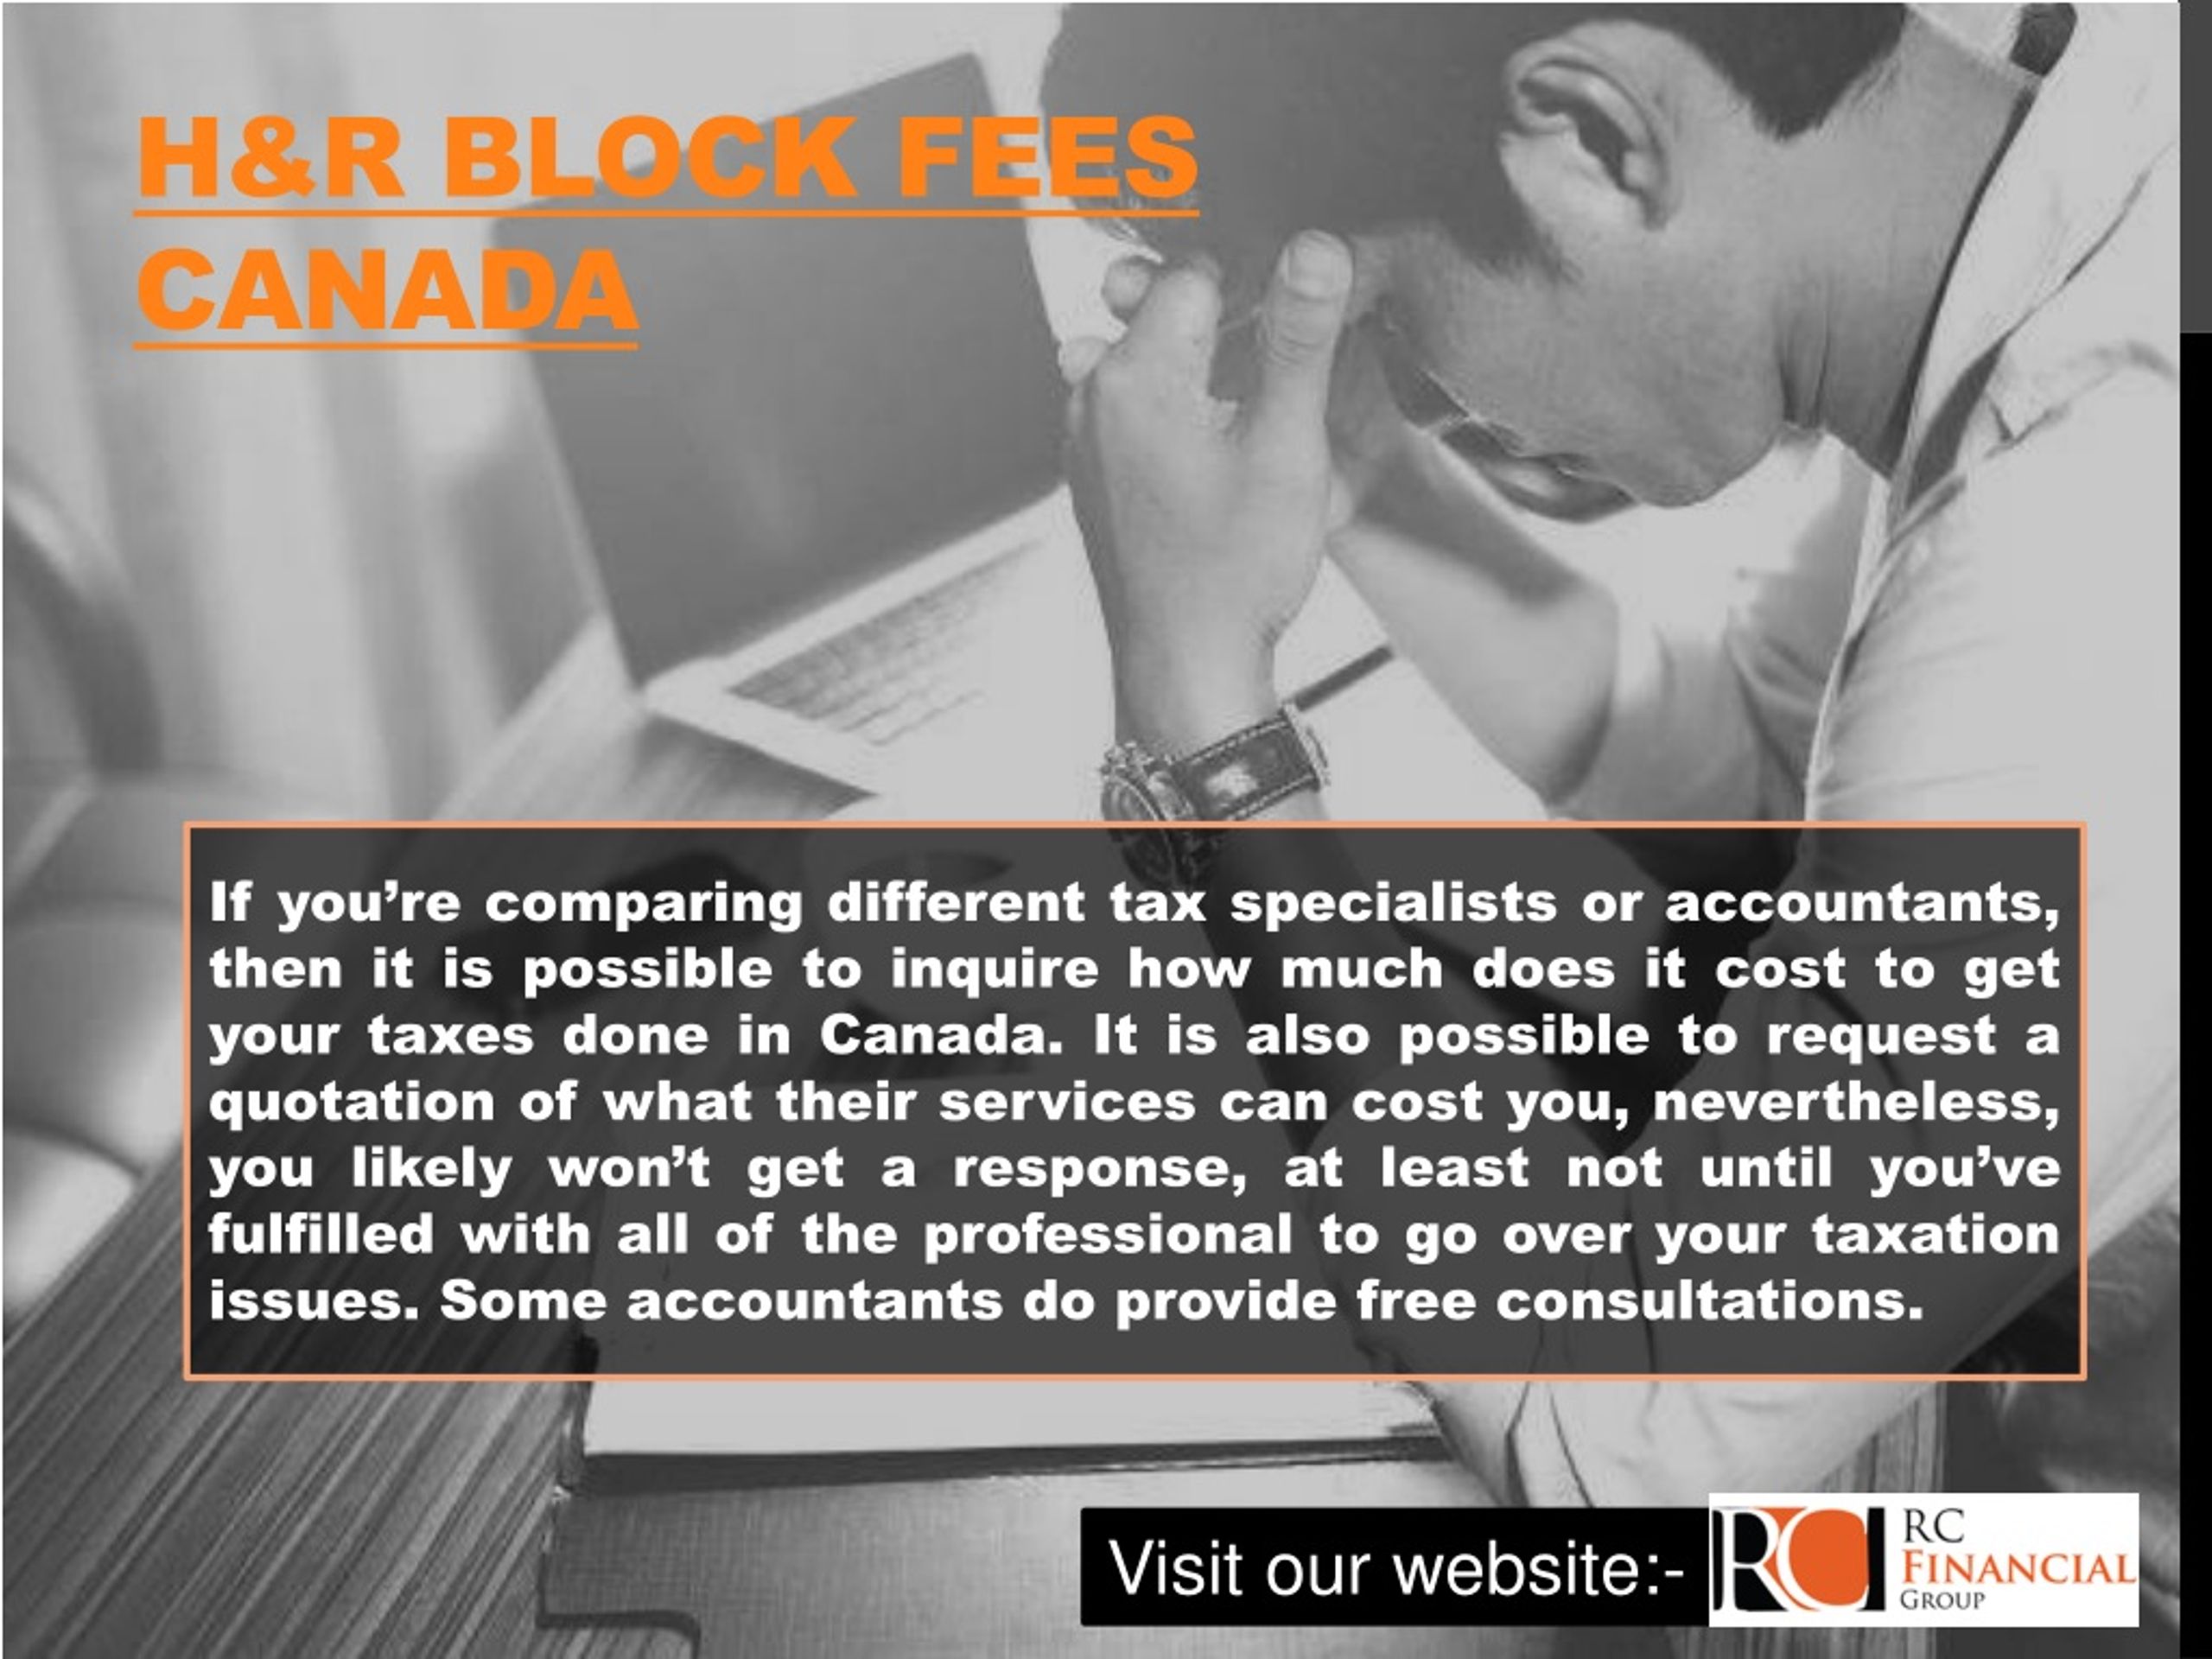 PPT Tax Preparation Fees Canada PowerPoint Presentation, free